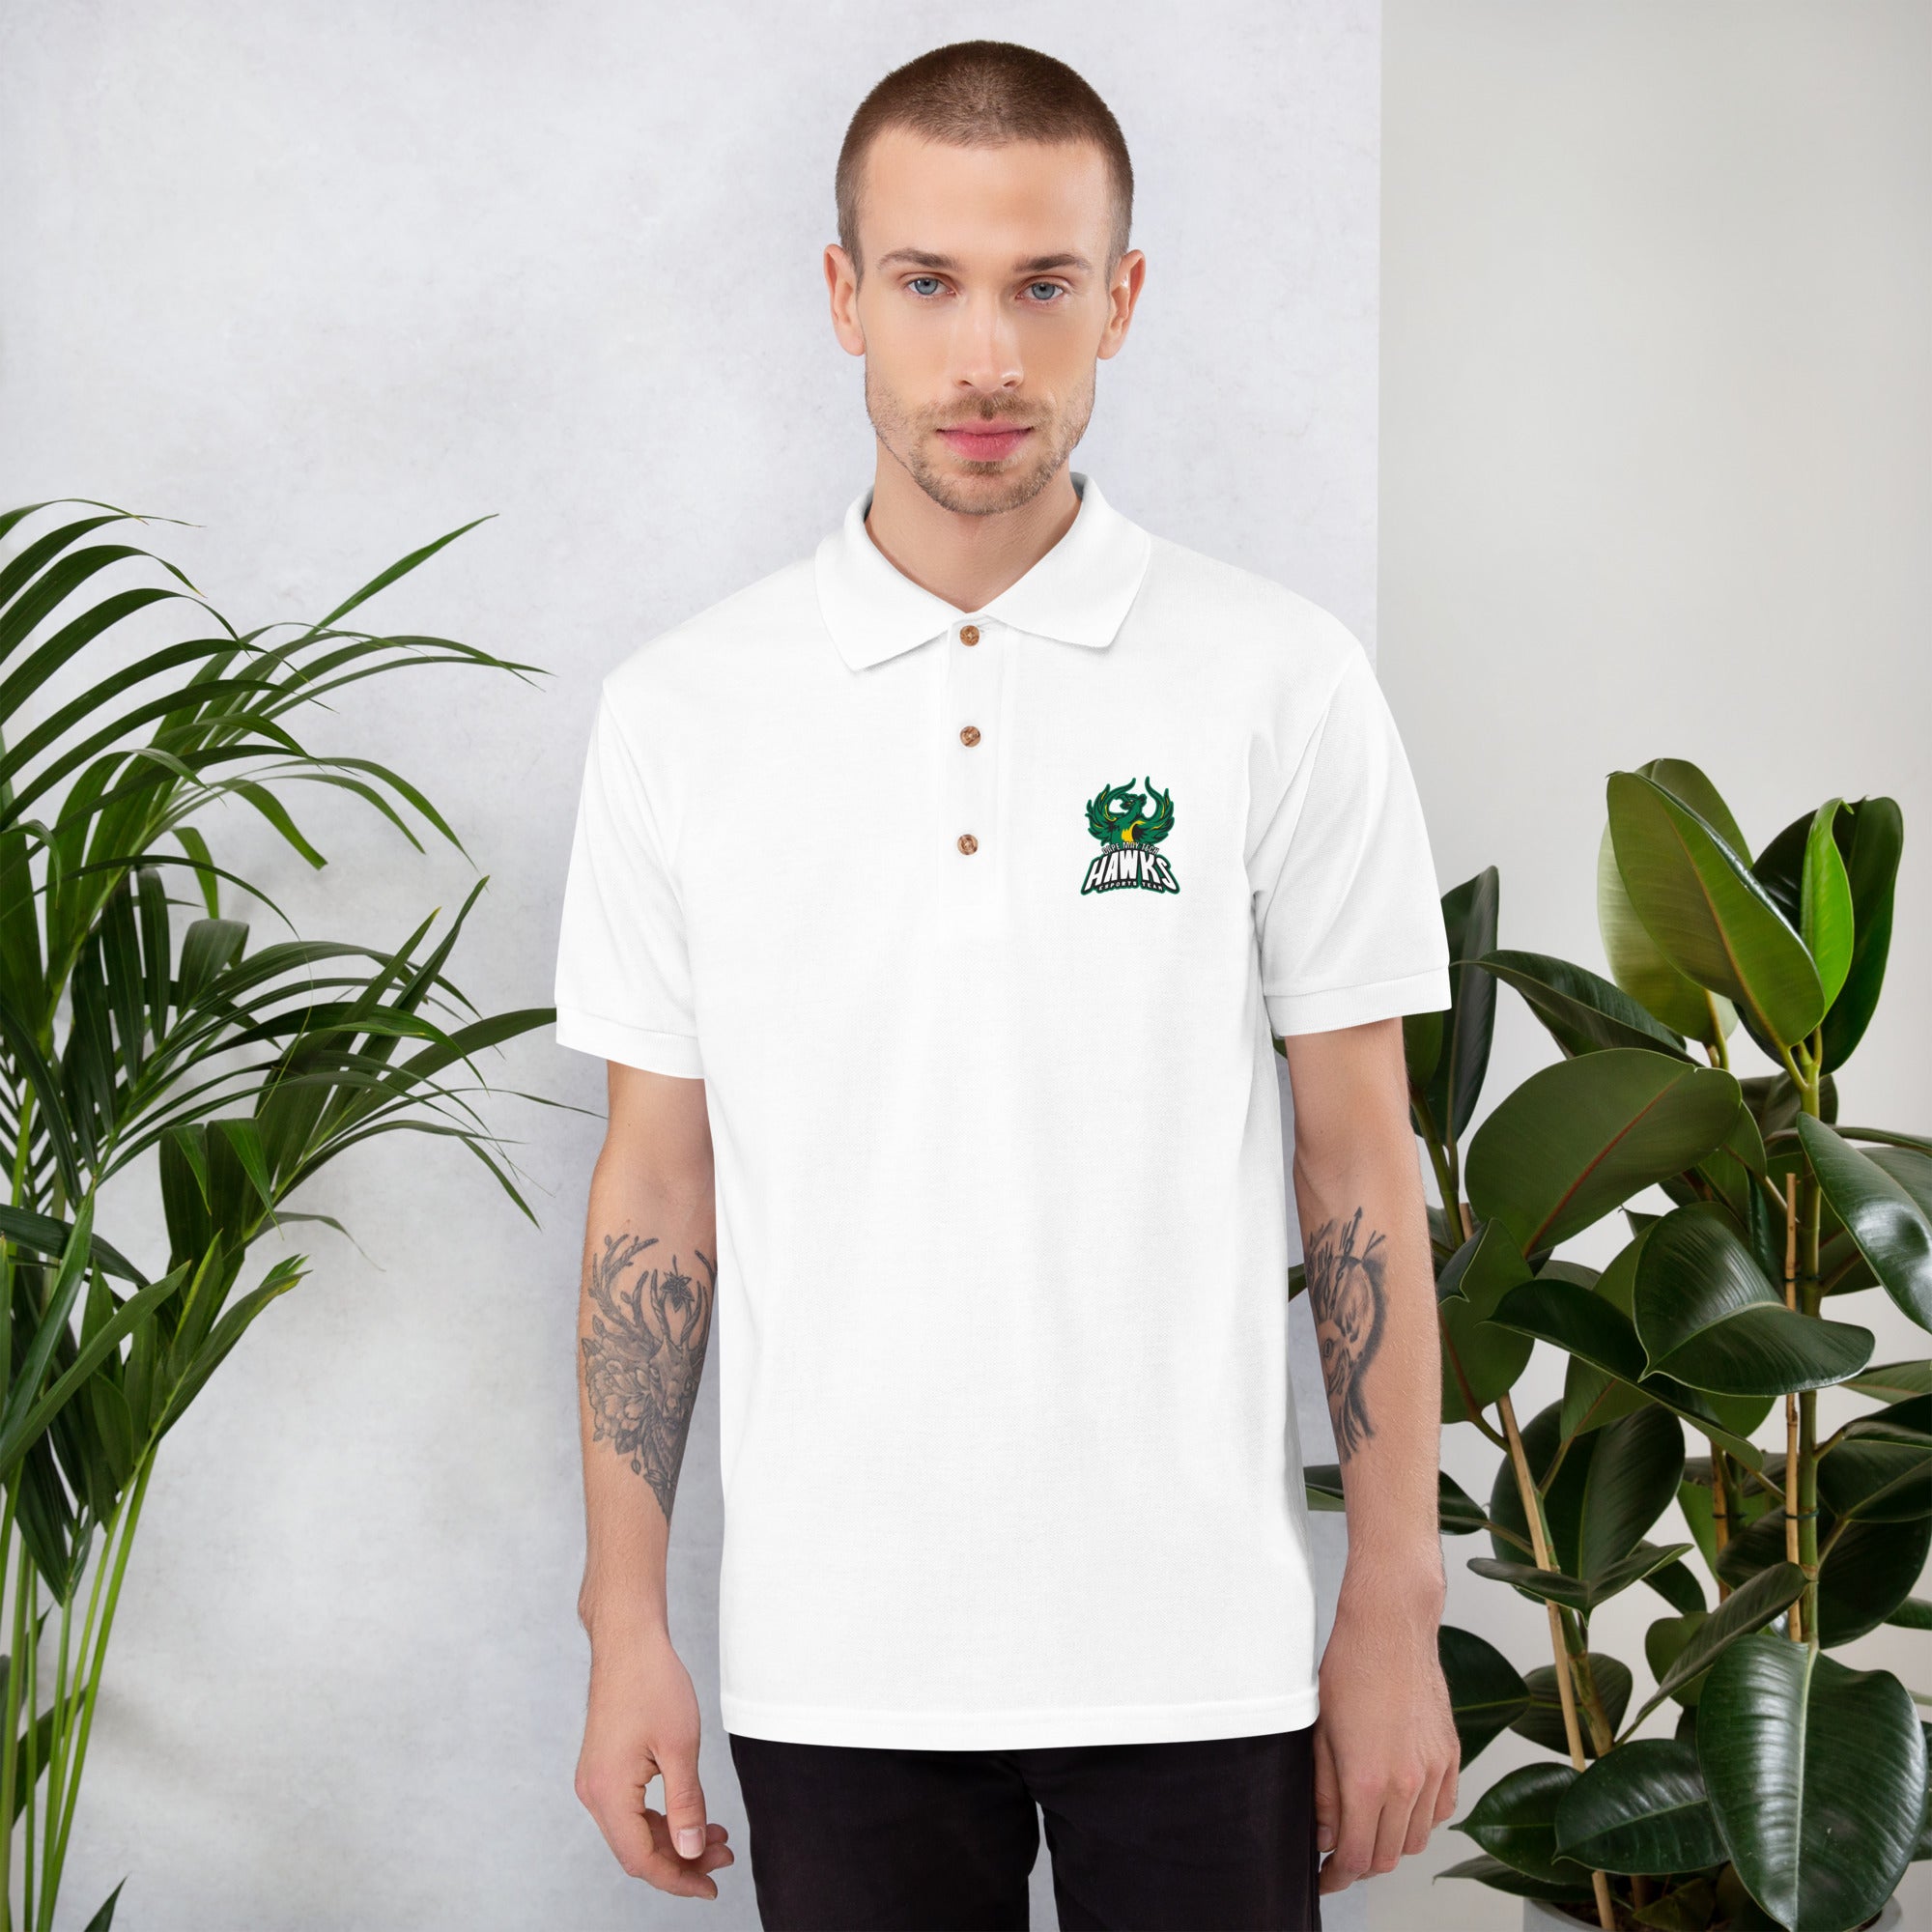 Cape May Technical | On Demand | Embroidered Polo Shirt